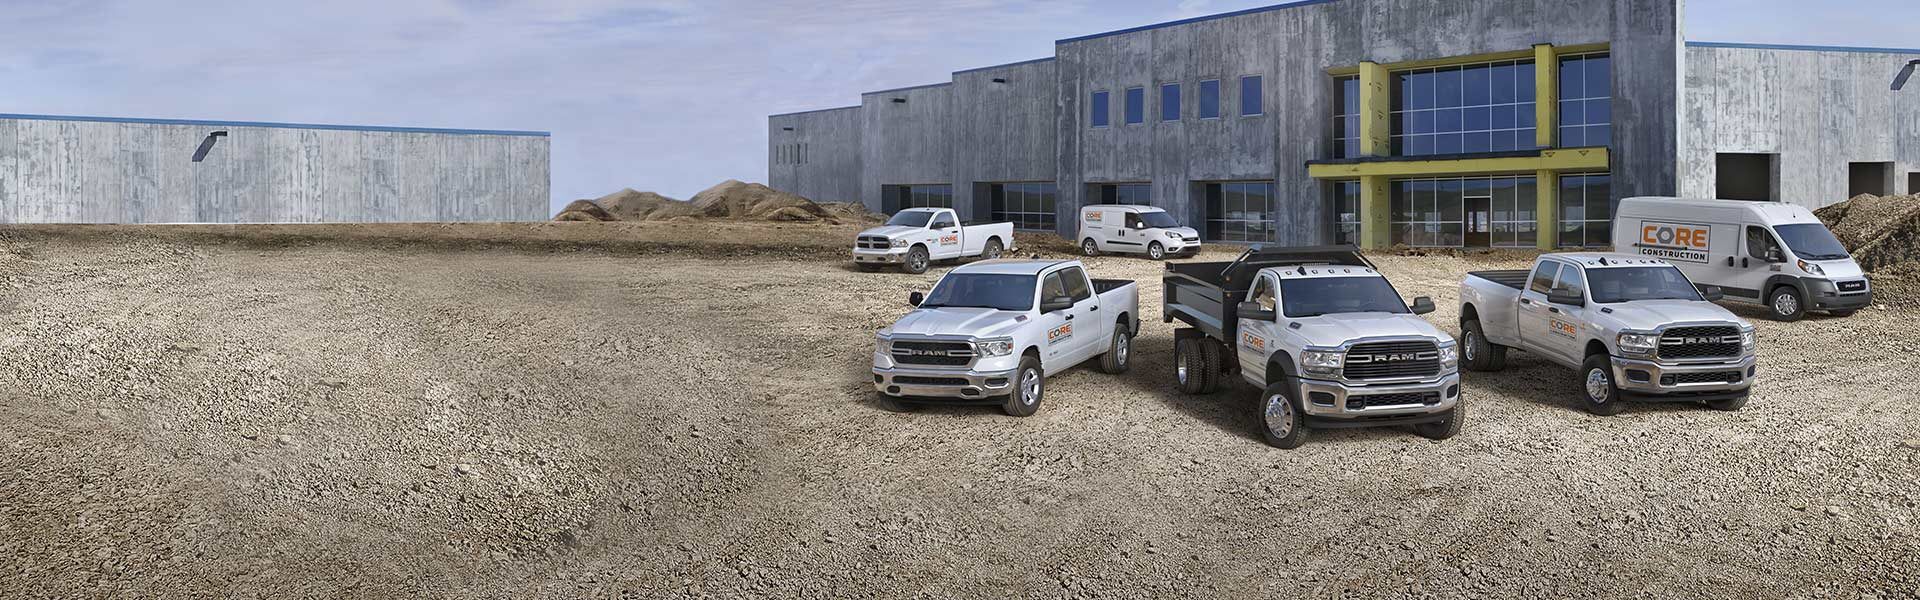 Six Ram vehicles including the Ram ProMaster City, Ram 1500 Classic, Ram 1500, Ram Chassis Cab, Ram 3500, and Ram ProMaster parked side by side at a construction site.